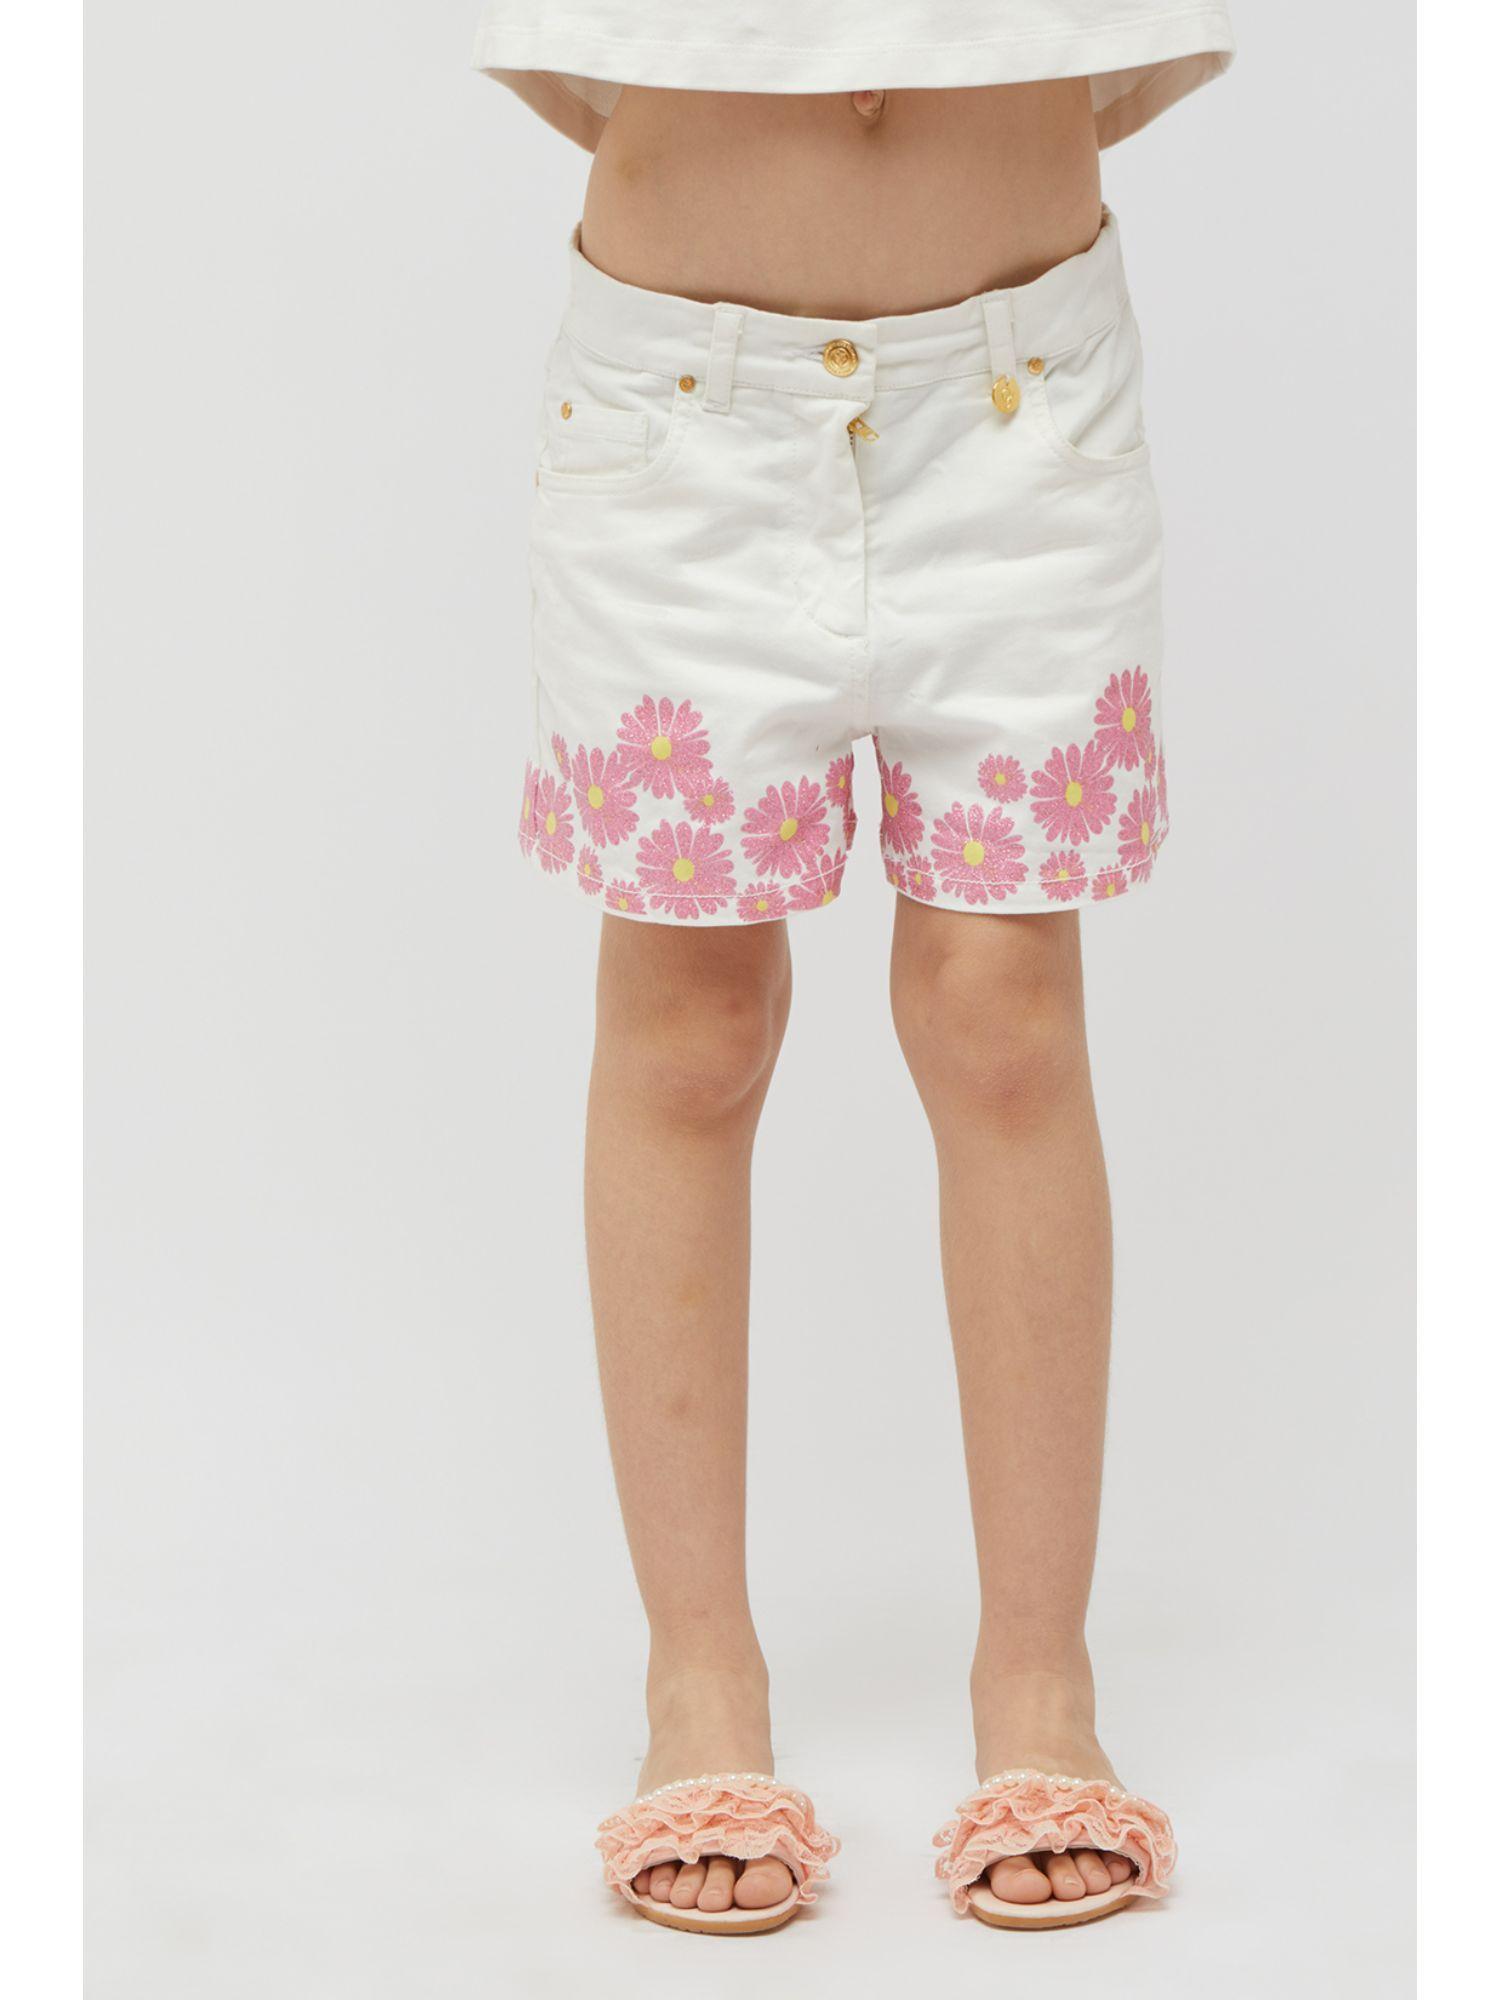 off white shorts with pink flower print